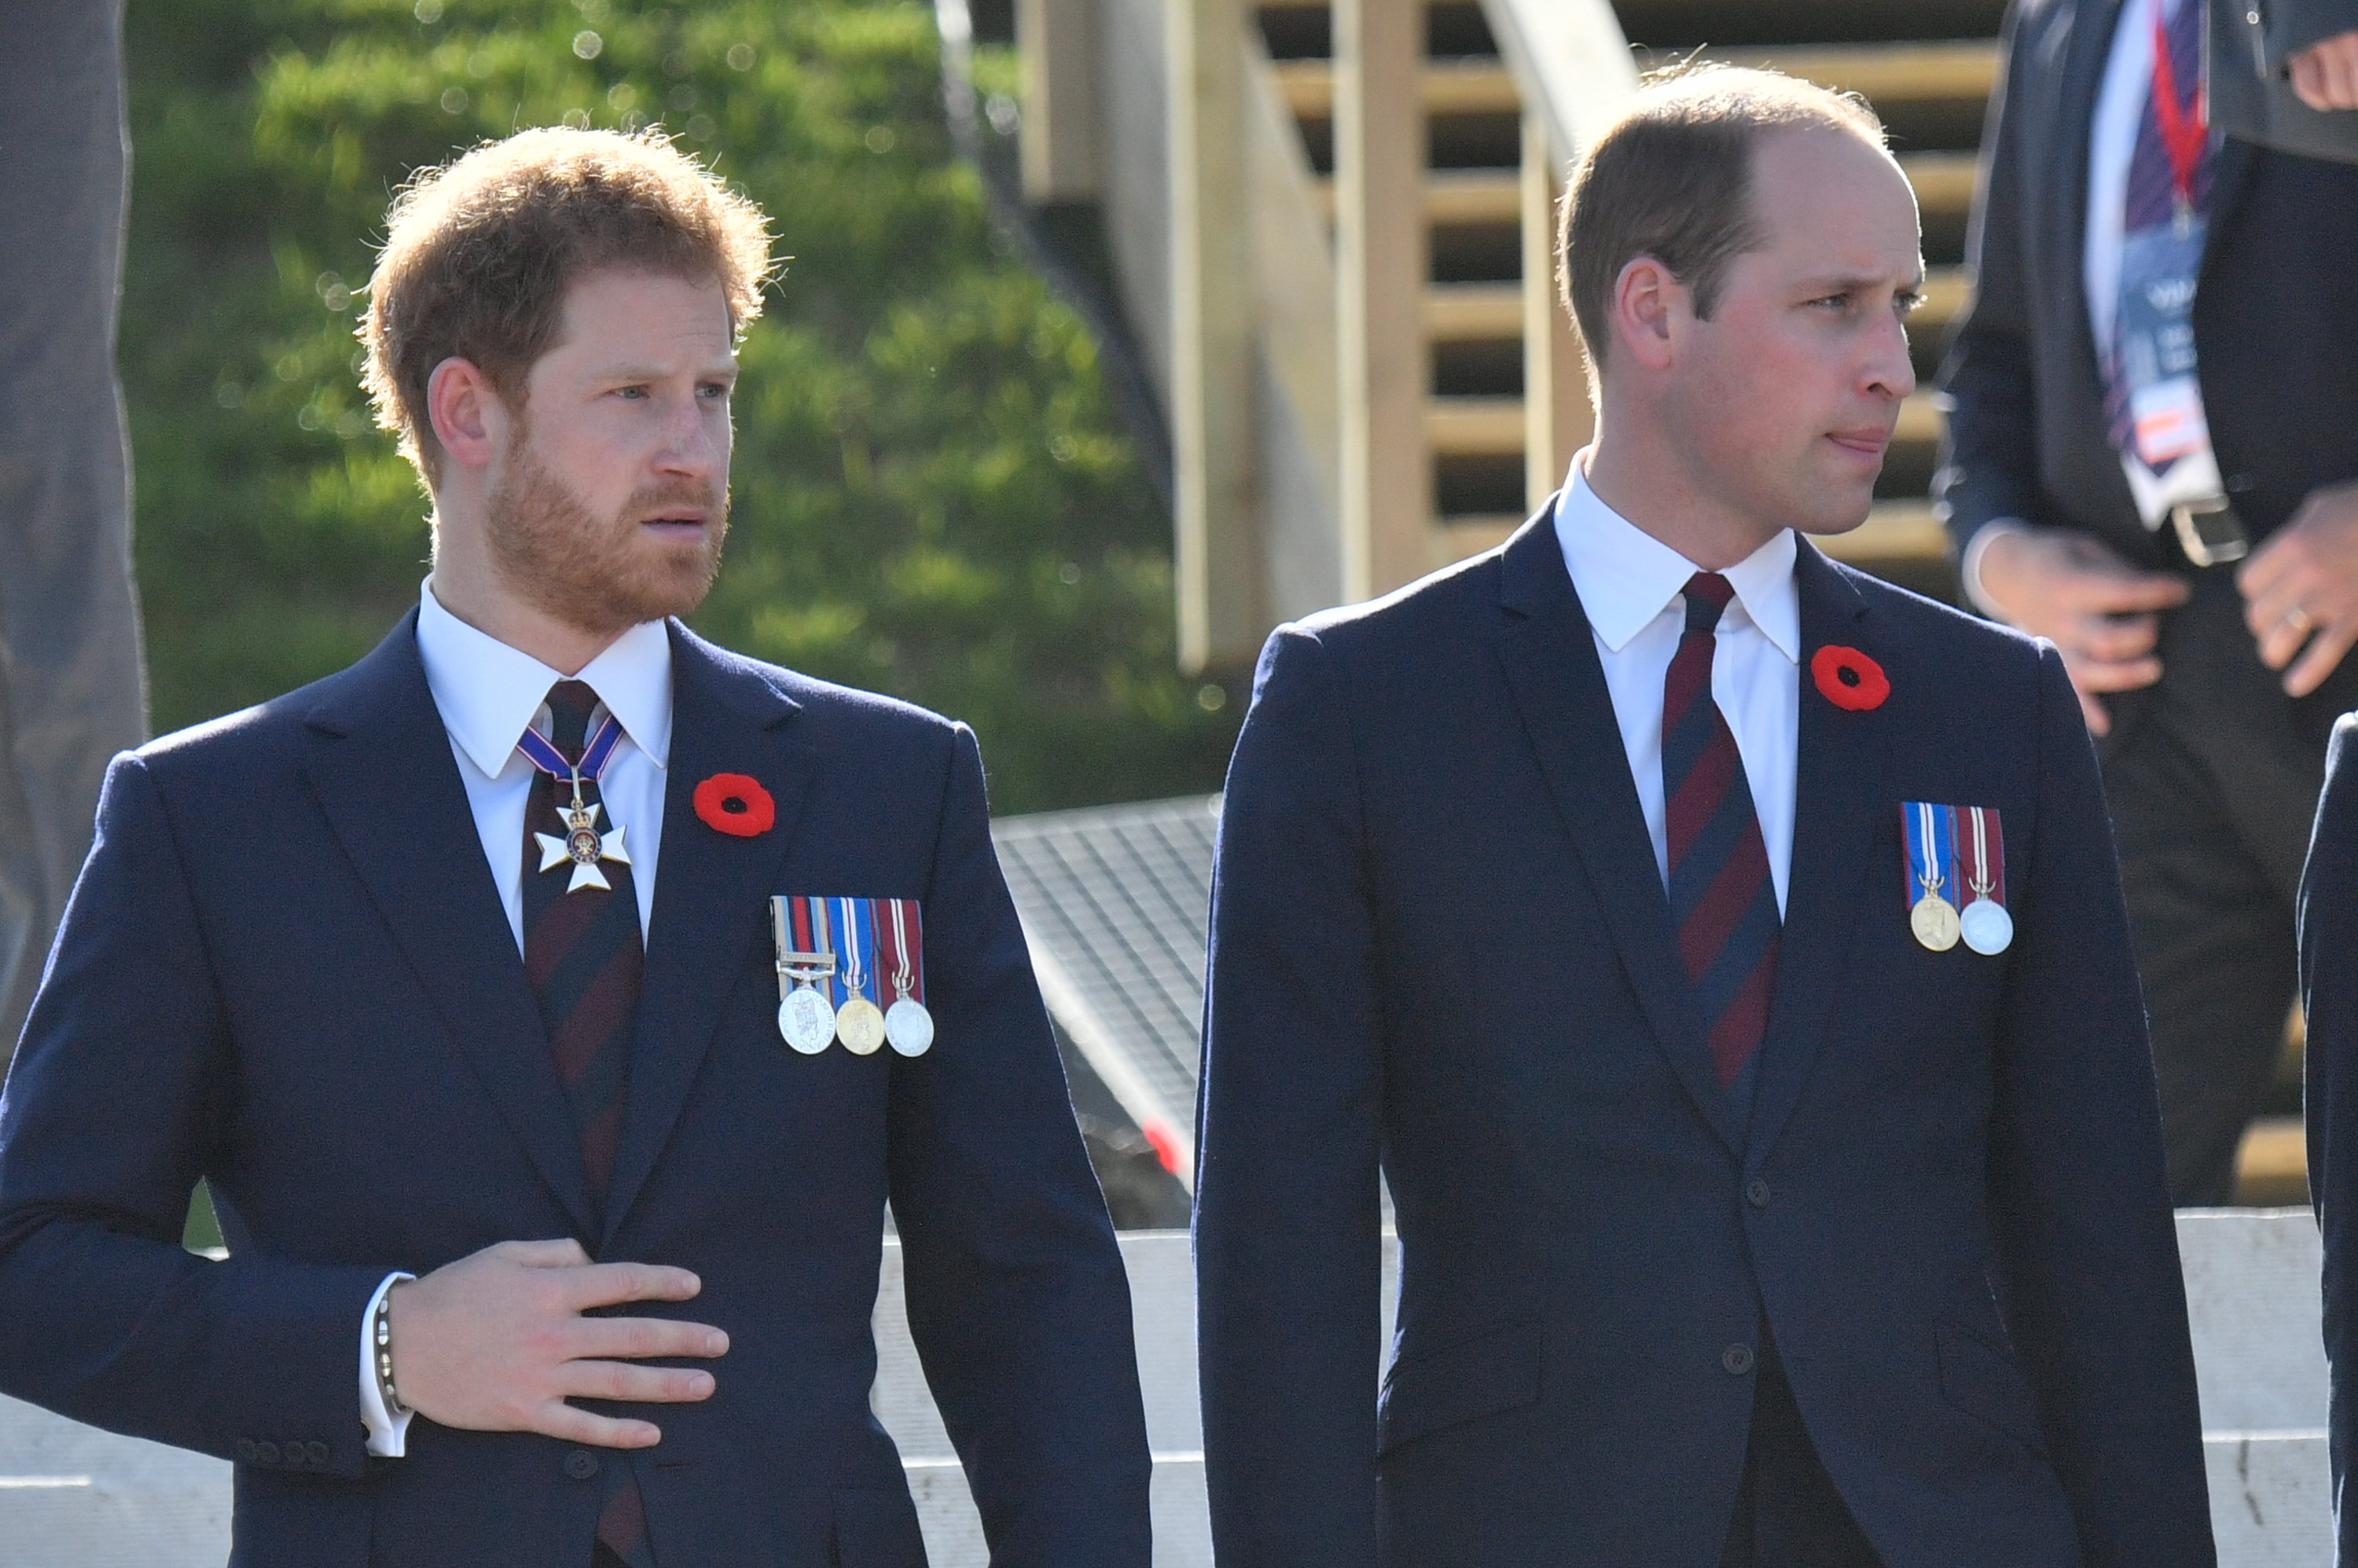 rince William, Duke of Cambridge and Prince Harry attend the commemorations for the 100th anniversary of the battle of Vimy Ridge on April 9, 2017 in Lille, France | Source: Getty Images